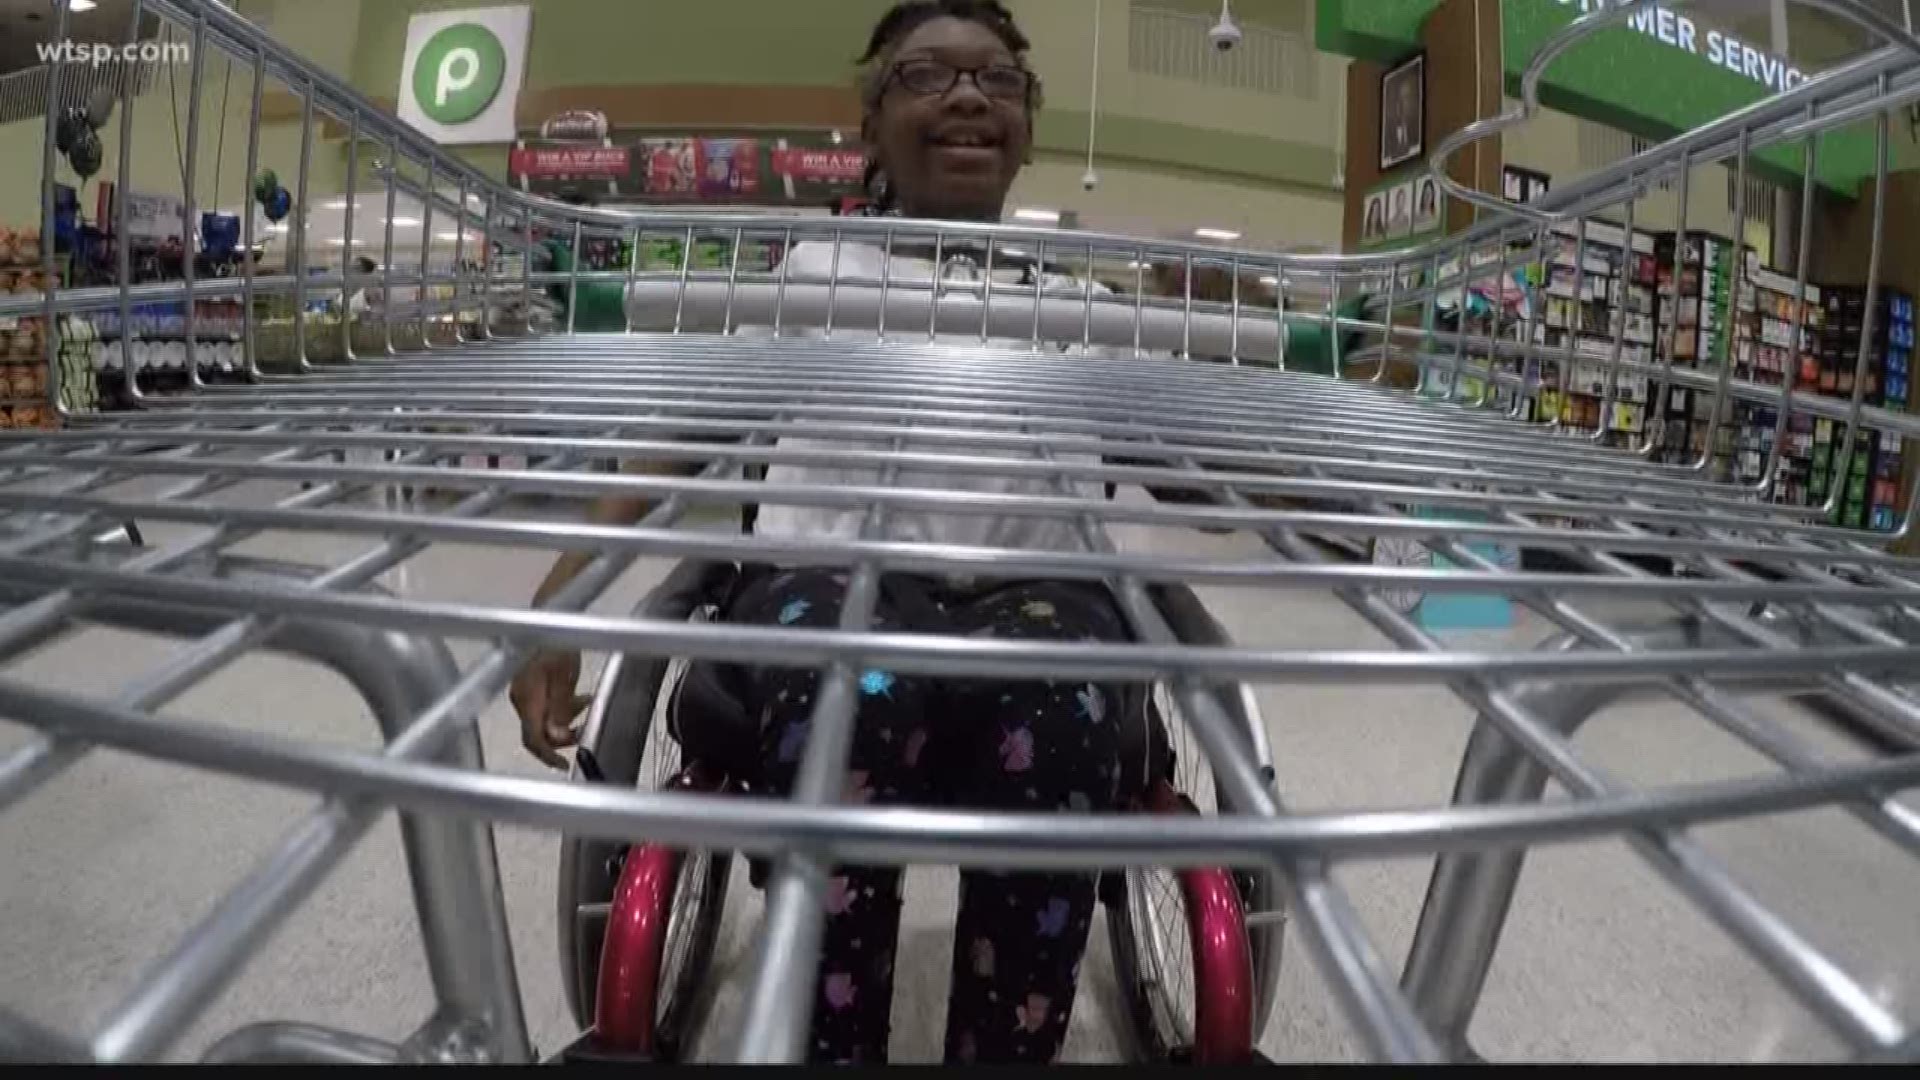 One Florida mom excitedly shared a video of her daughter using one of the new carts at a Publix in Lutz. https://bit.ly/2IOXJVH